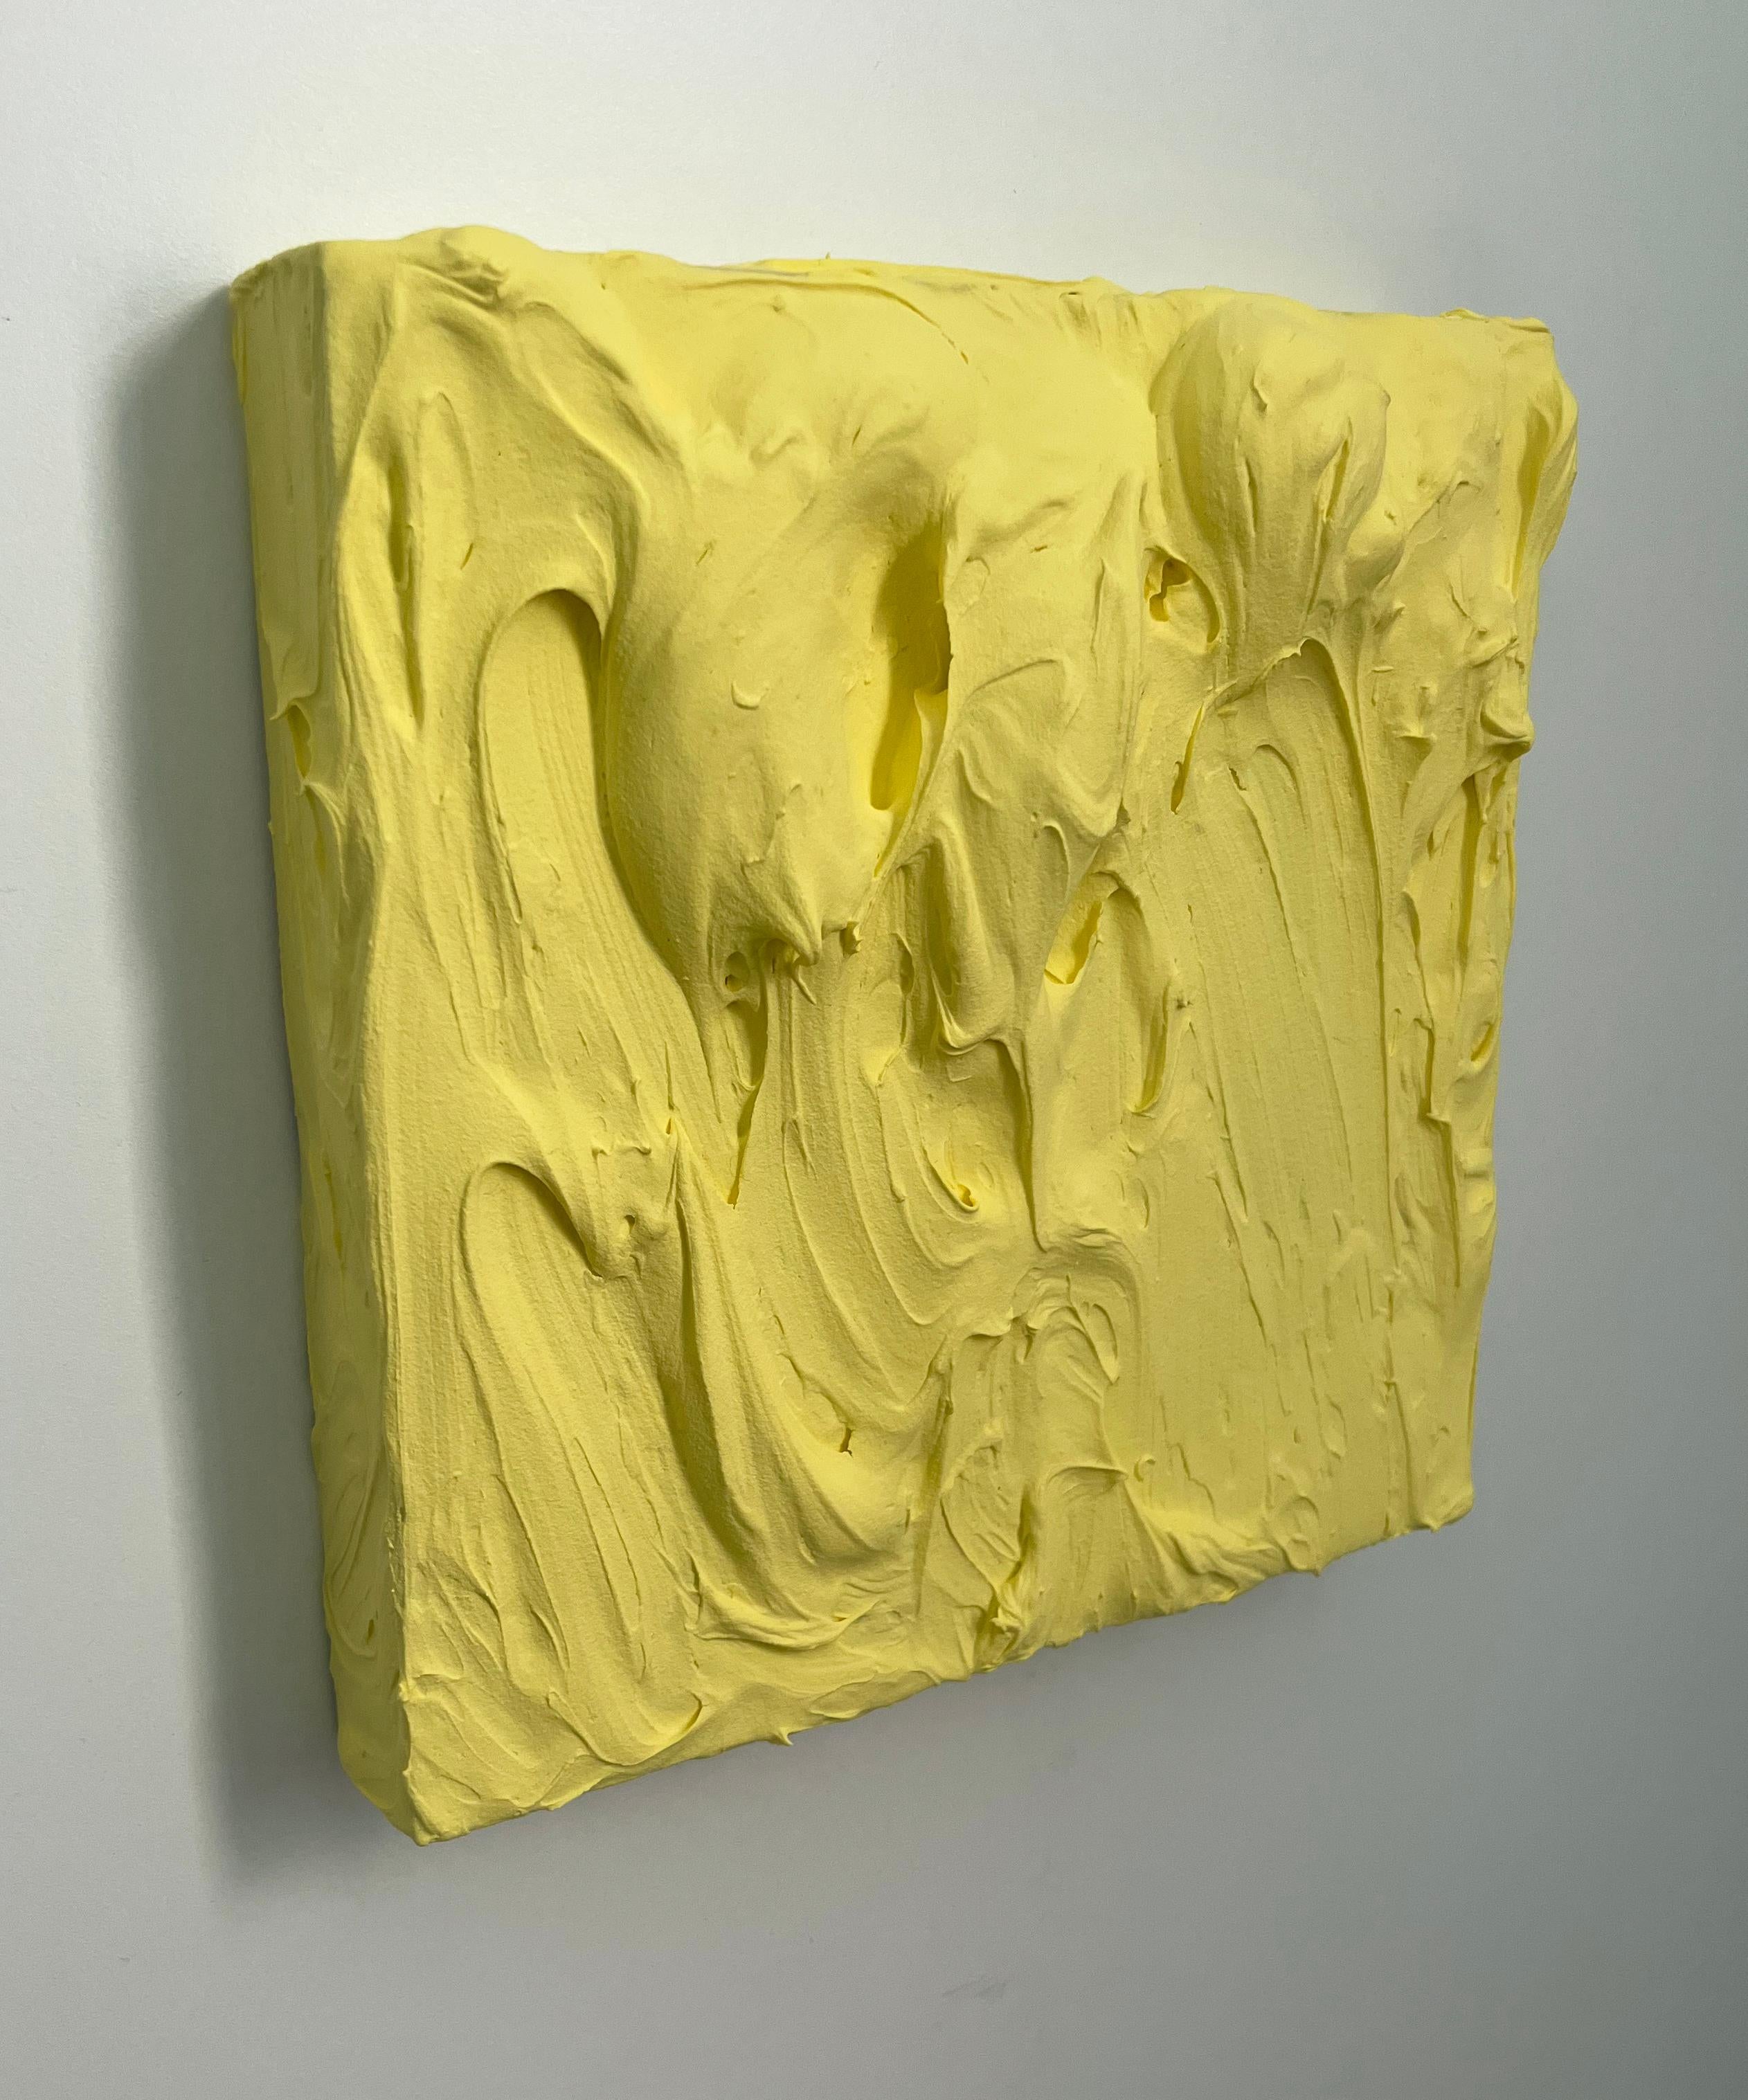 Butter Excess (popcorn impasto thick painting monochrome pop square design) - Sculpture by Chloe Hedden